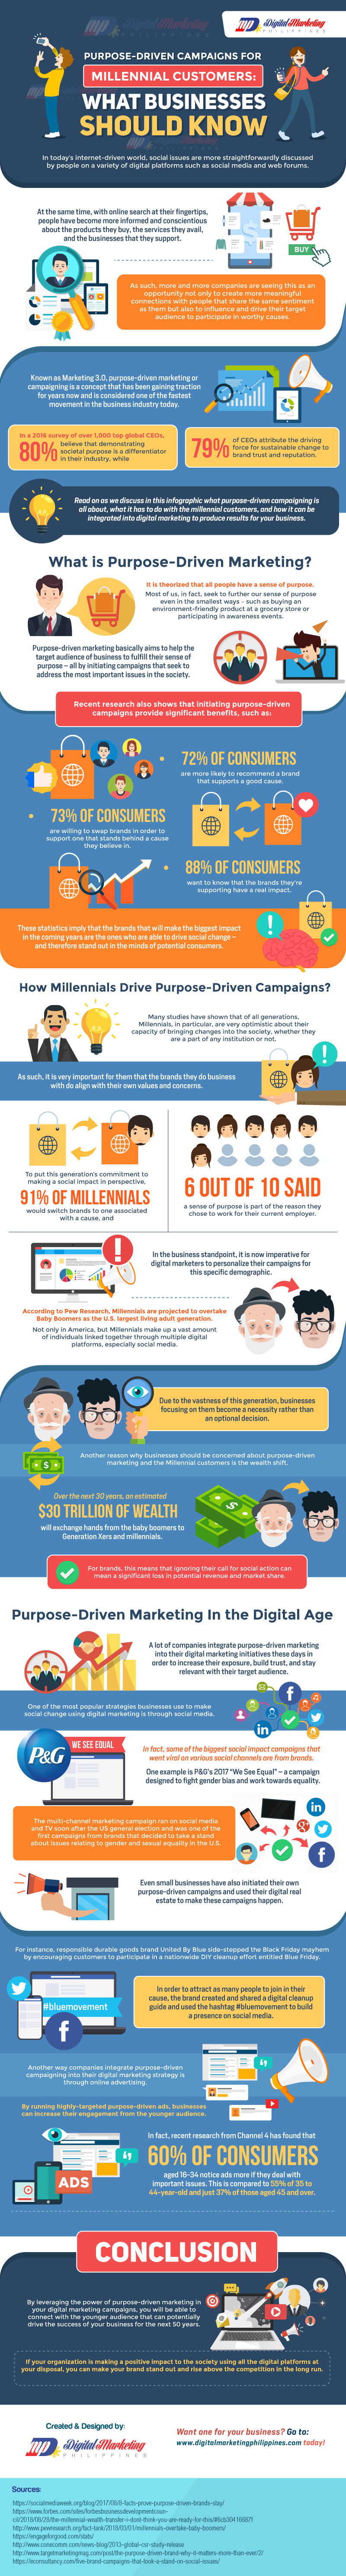 Purpose-Driven Campaigns for Millennial Customers: What Businesses Should Know